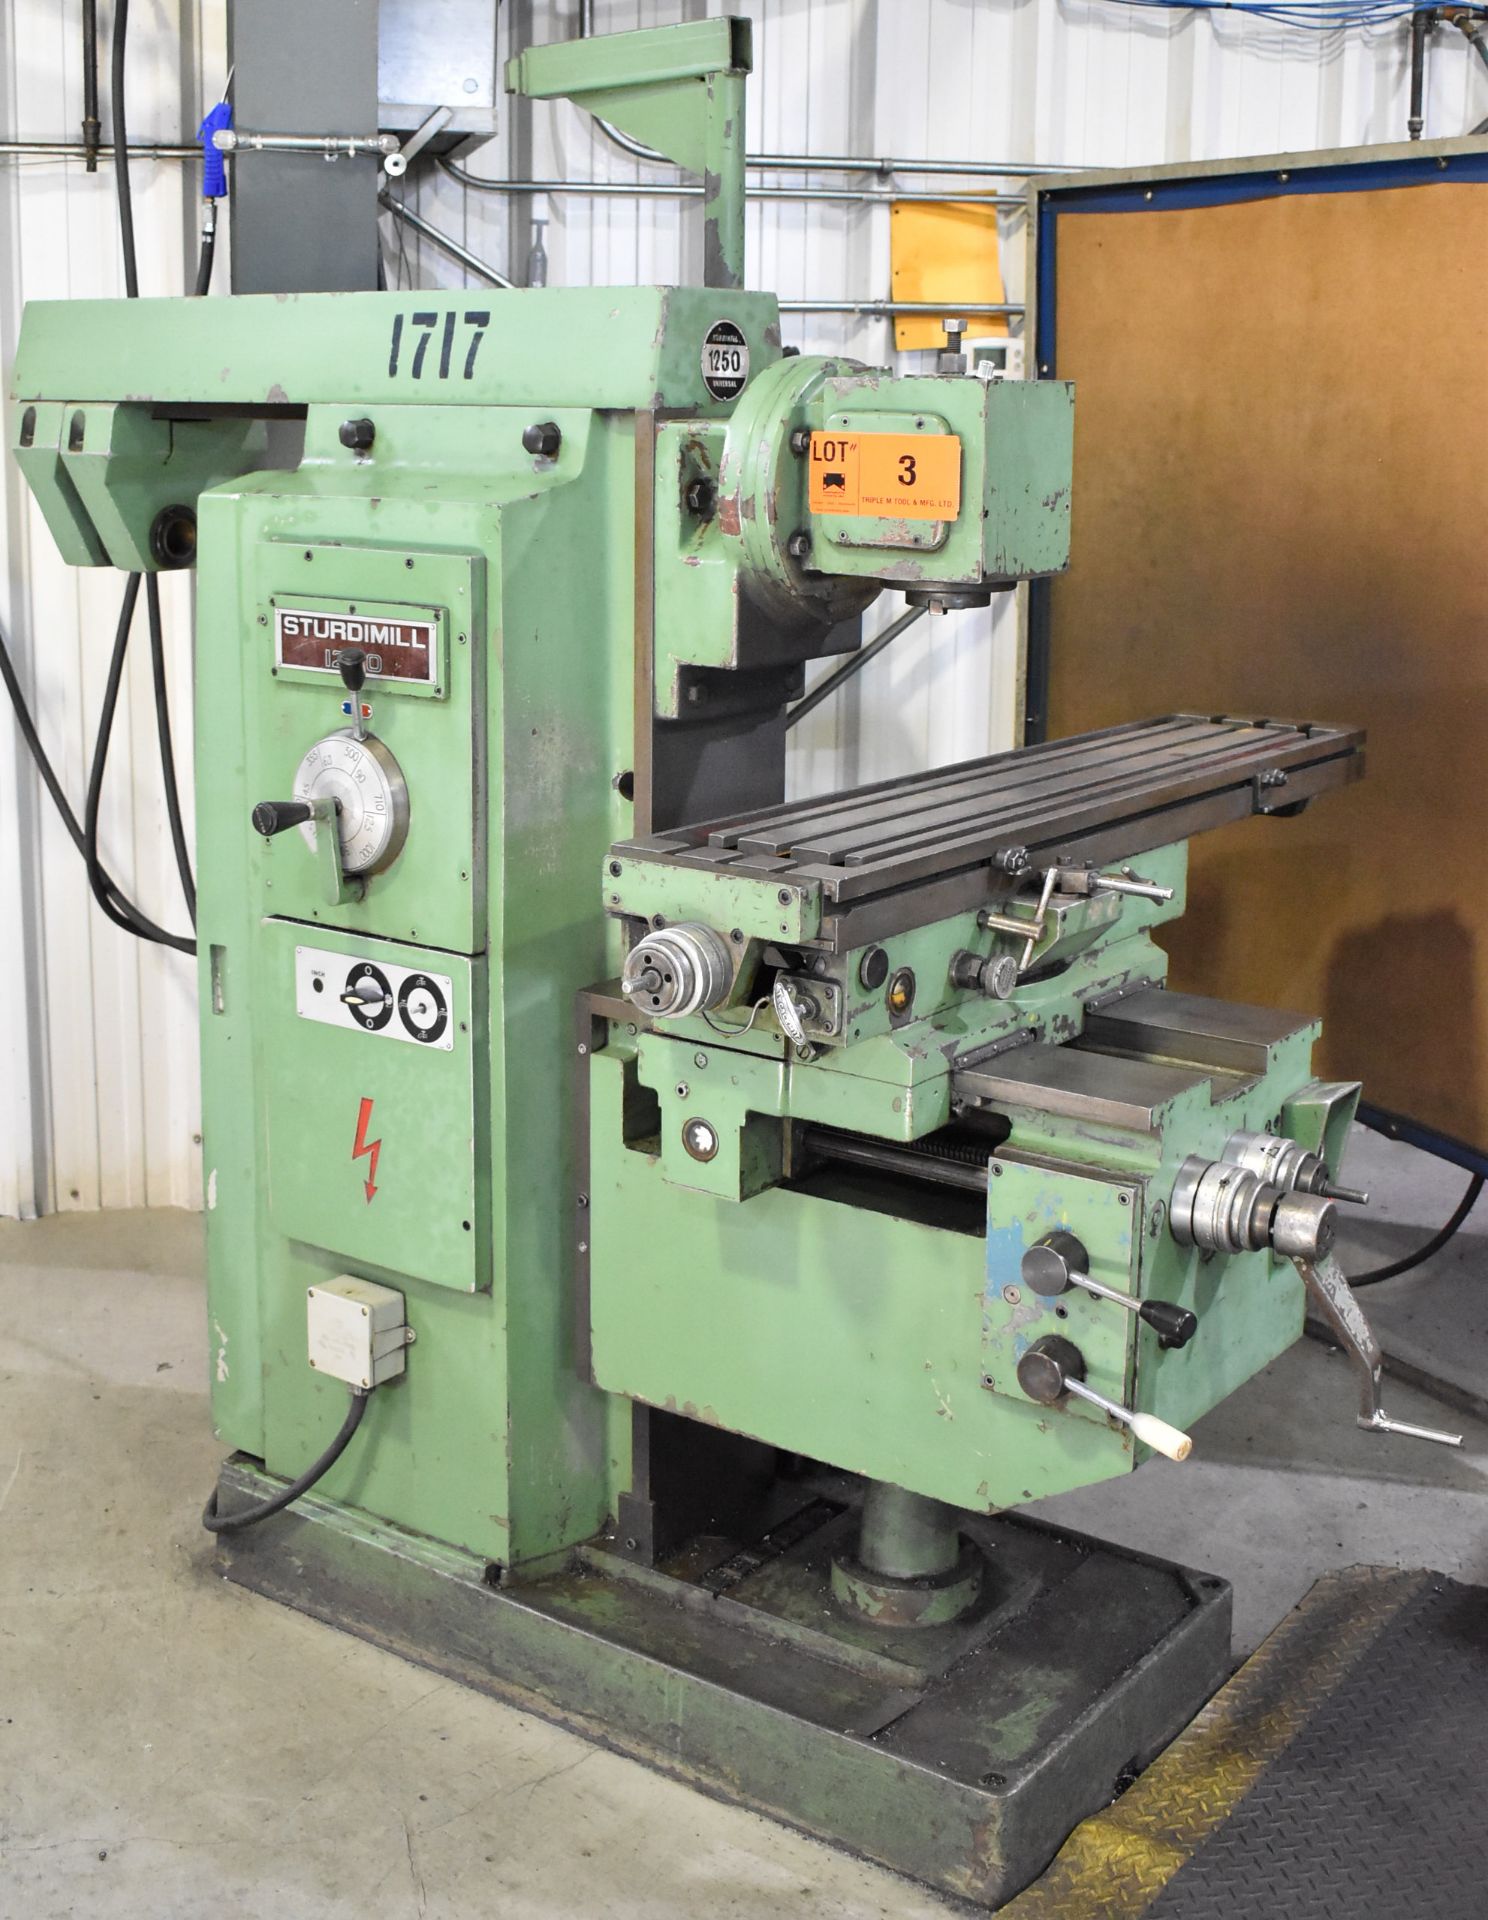 ELLIOT STURDIMILL 1250 VERTICAL MILLING MACHINE WITH 50" X 10.5" TABLE, #40 SPINDLE TAPER, SPEEDS TO